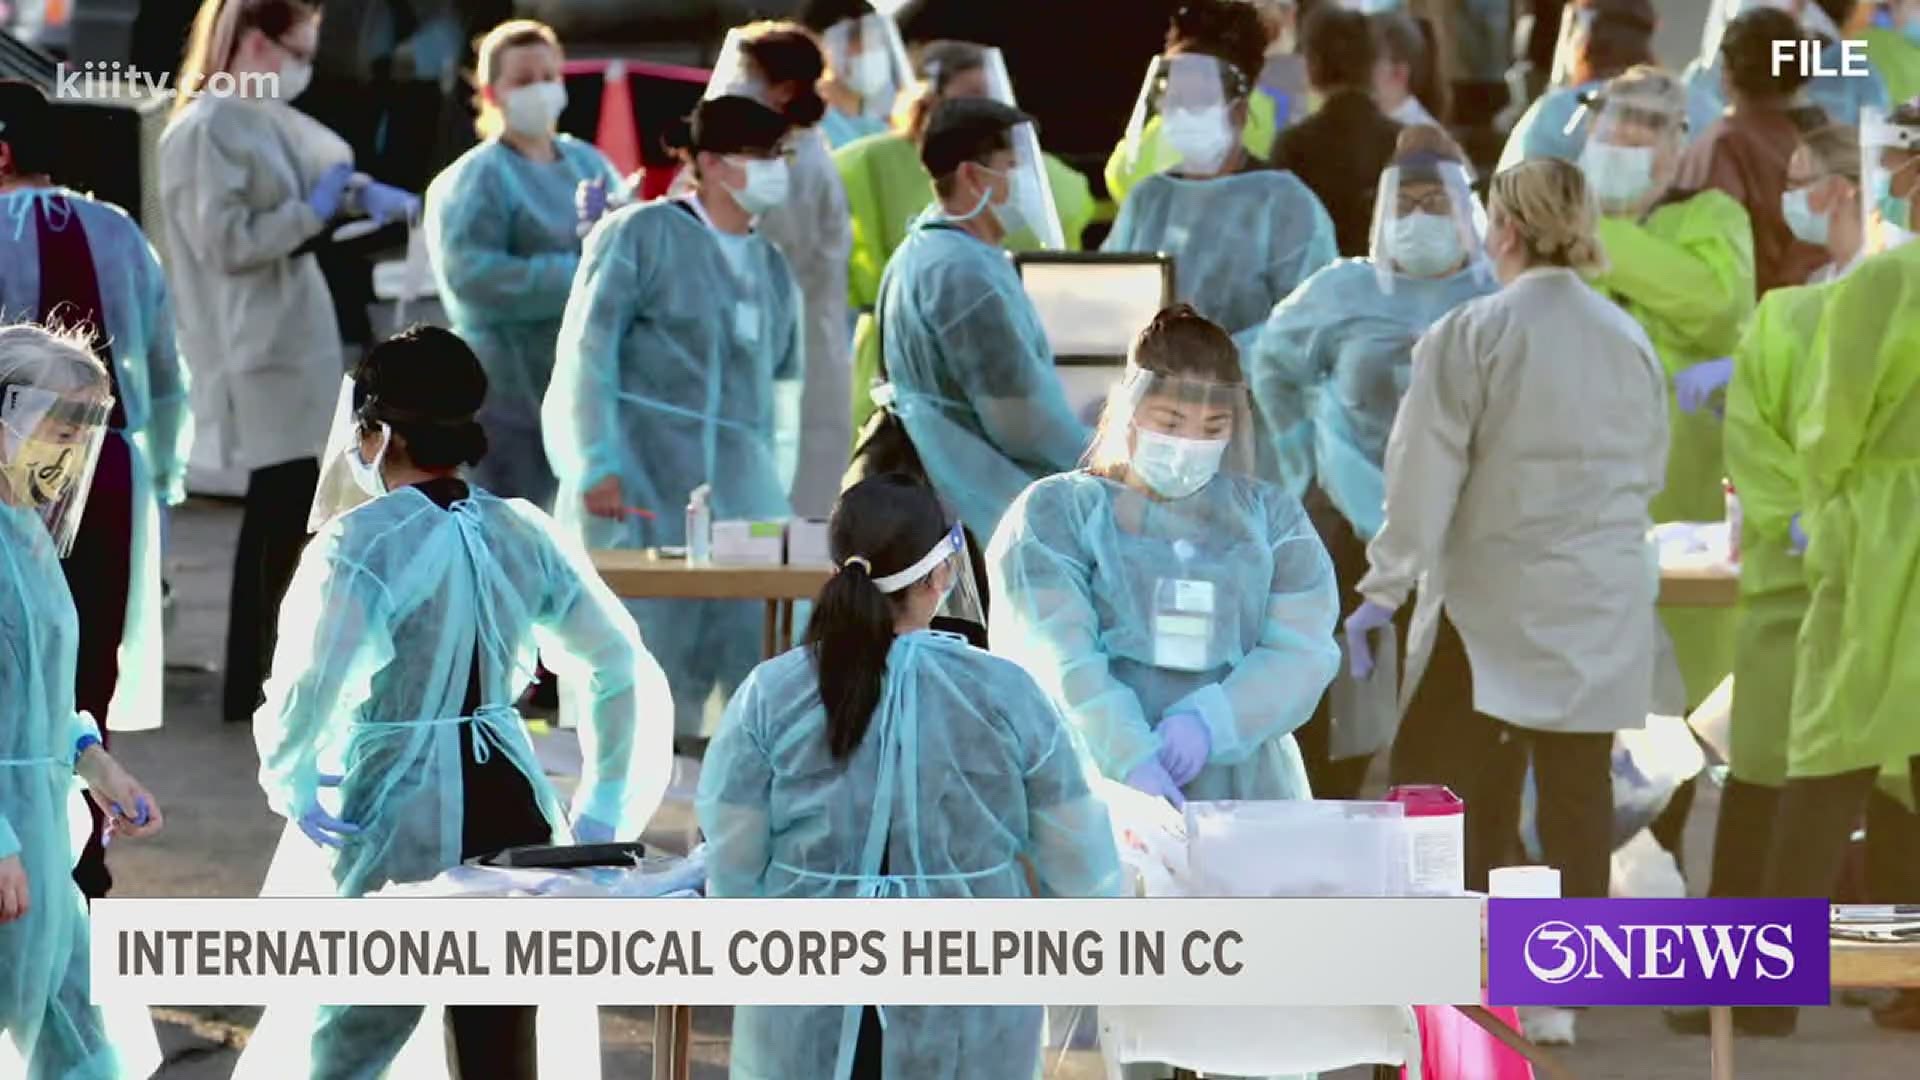 The International Medical Corps has helped fight outbreaks across the world, including Ebola in Africa.